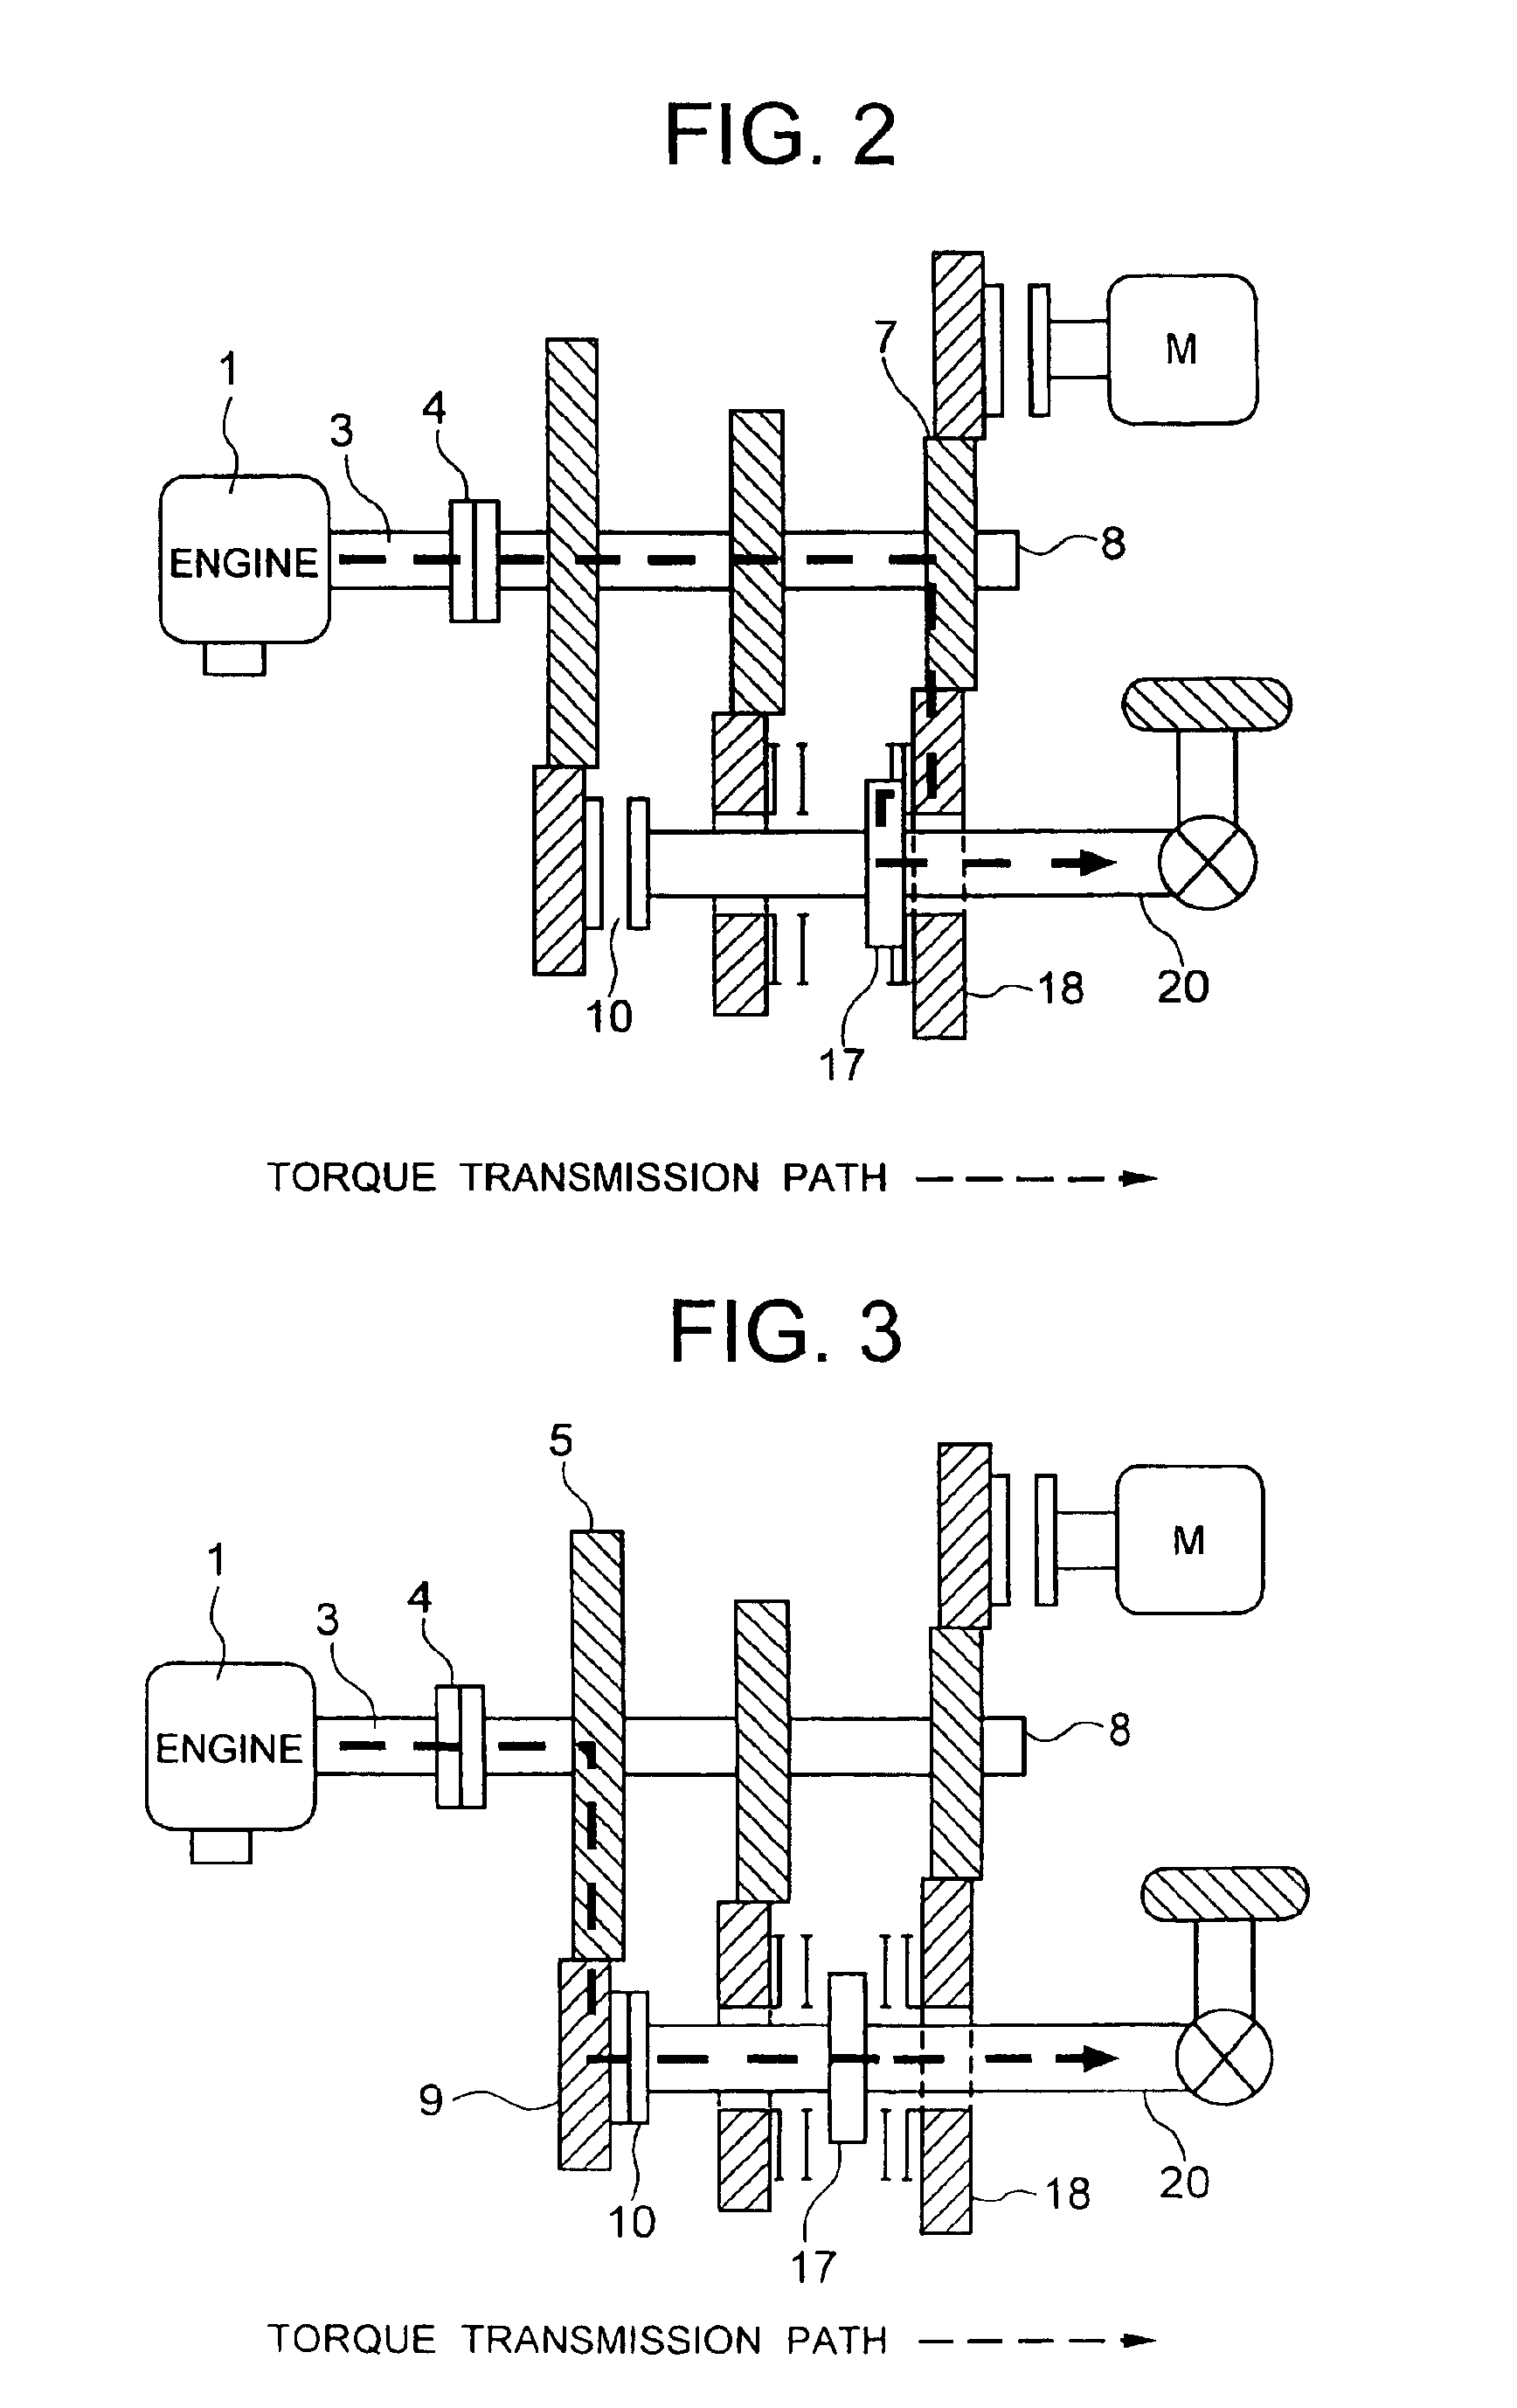 Apparatus and method of controlling a vehicle